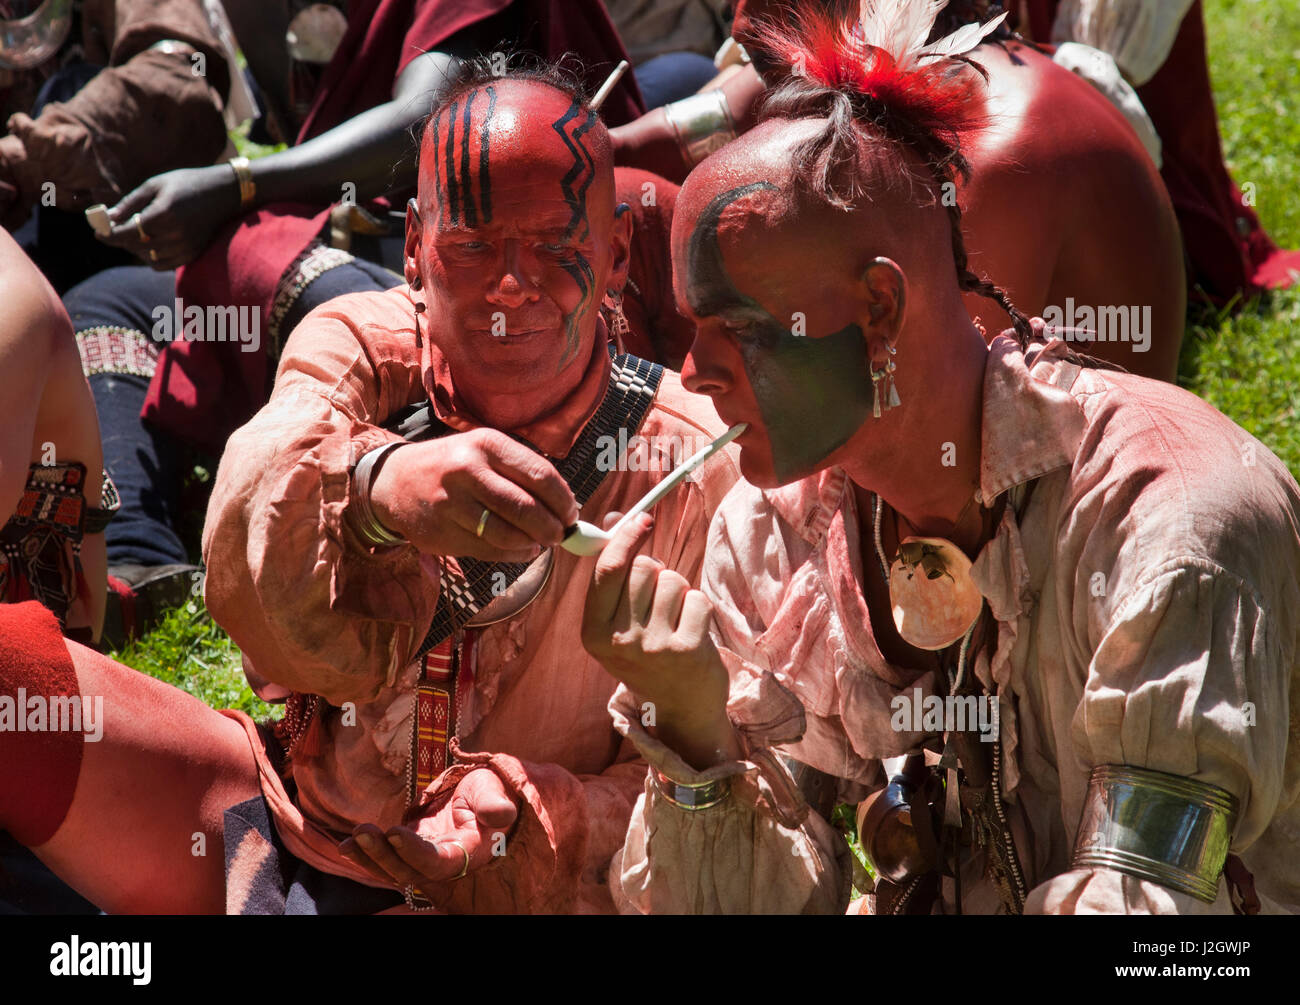 Native American Indians of the Northeastern Tribes place tobacco, also known as Kinnikinnick, in a pipe for a pipe ceremony during the Fort Niagara French Indian Wars Reenactment, NY Stock Photo